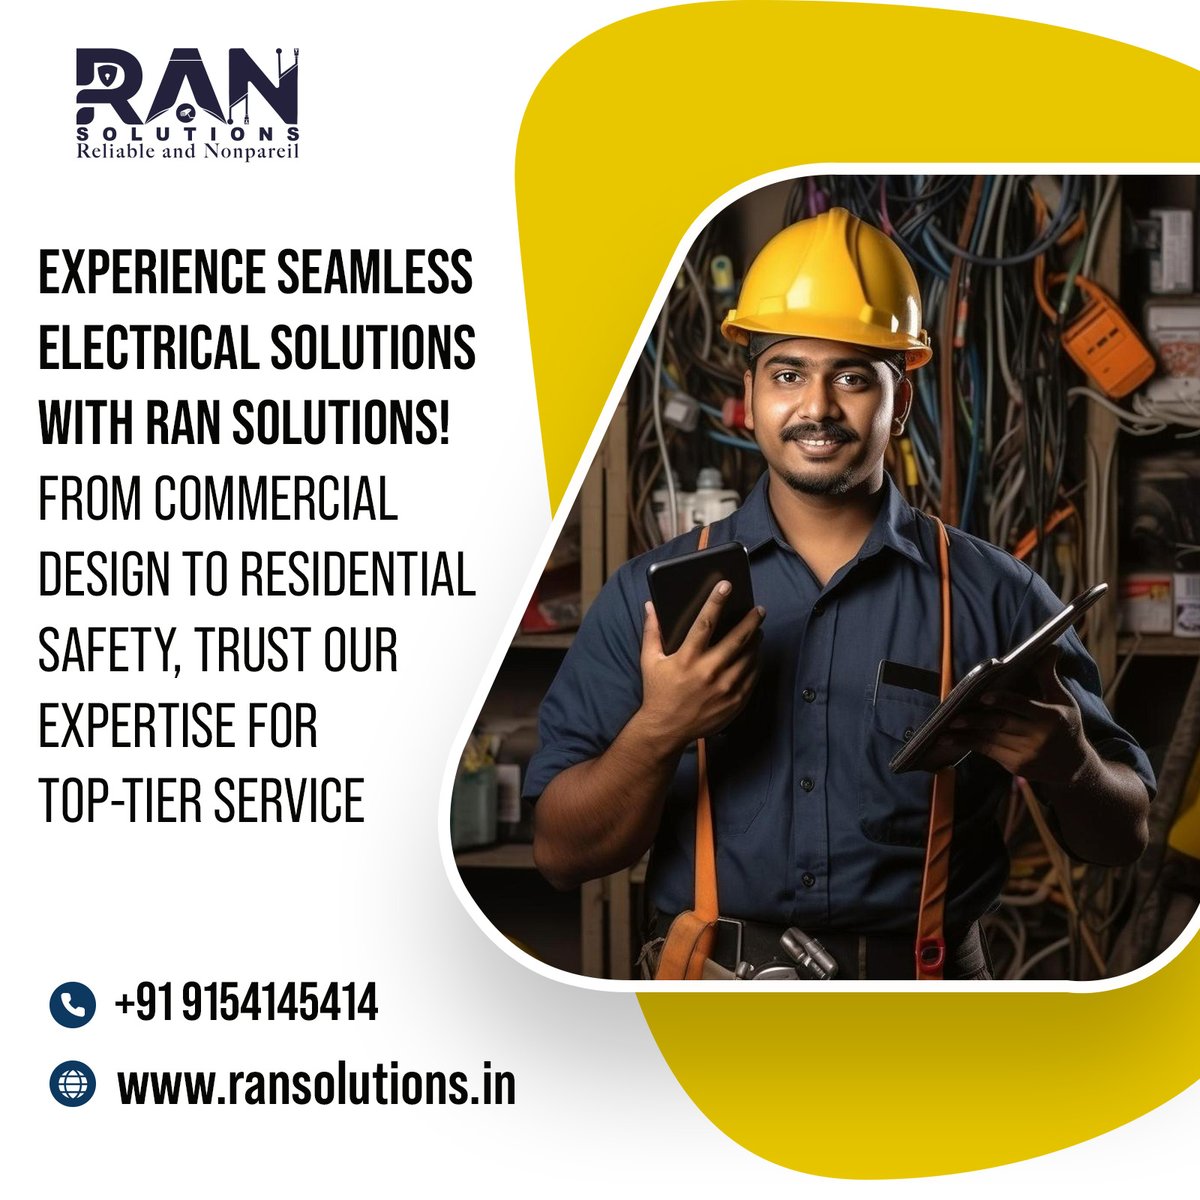 Light up confidently with Ran Solutions! Tailored electrical solutions for all needs. Trust our expertise for peace of mind. Contact us now!
#electricalsolutions #ransolutions #expertise #toptierservice #commercialdesign #residentialsafety #lightingdesign #electricalengineering